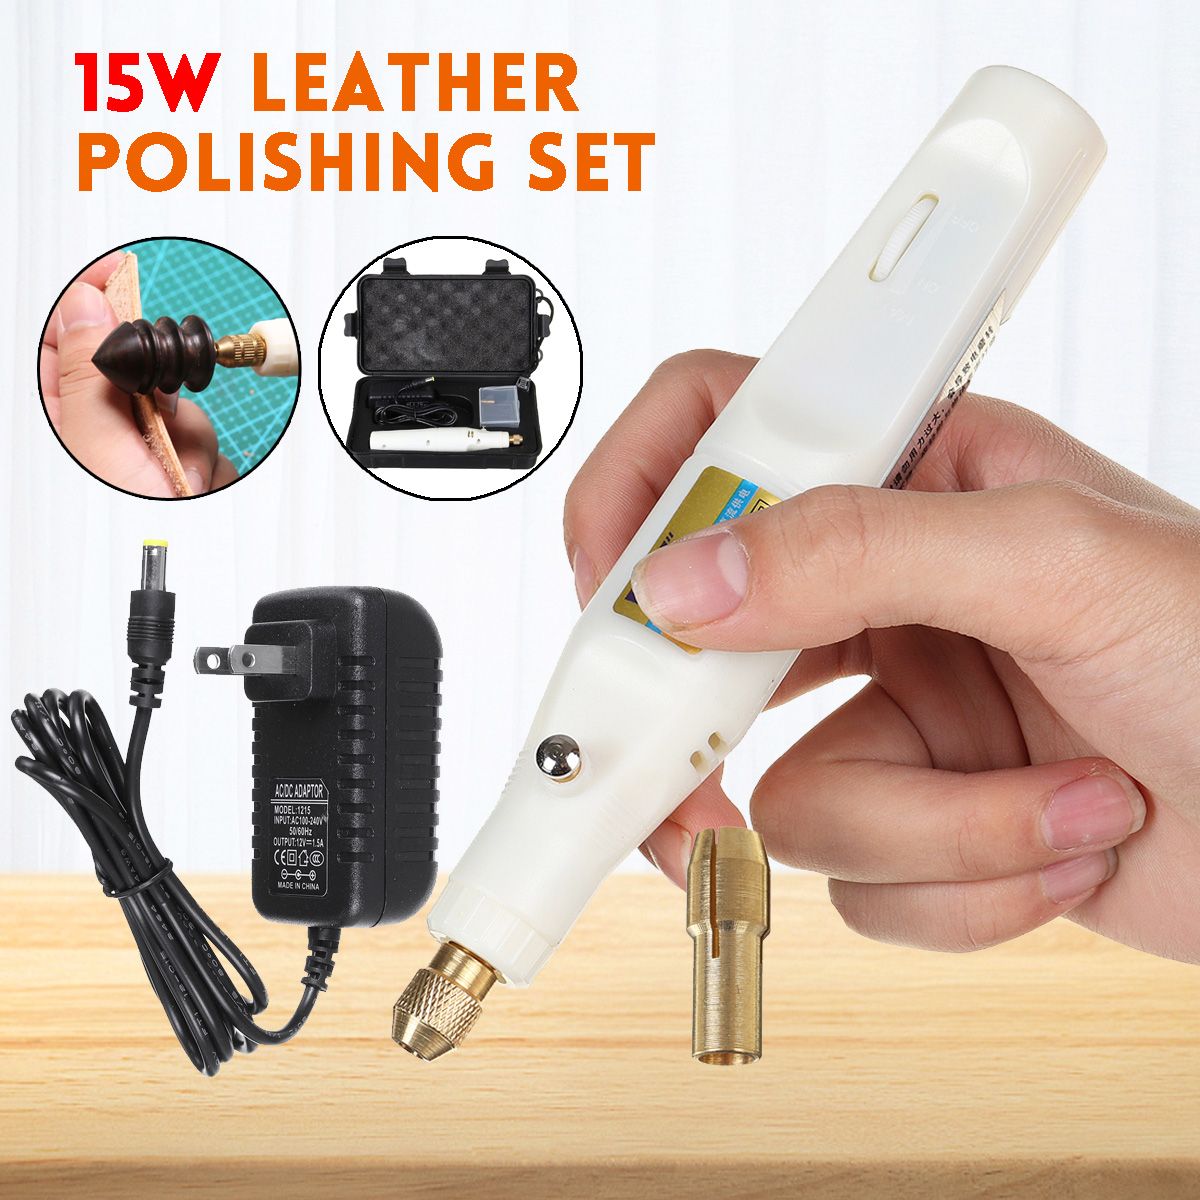 15W-Leather-Polishing-Set-Electric-Polisher-Abrasive-Tool-DIY-Small-Projects-1695729